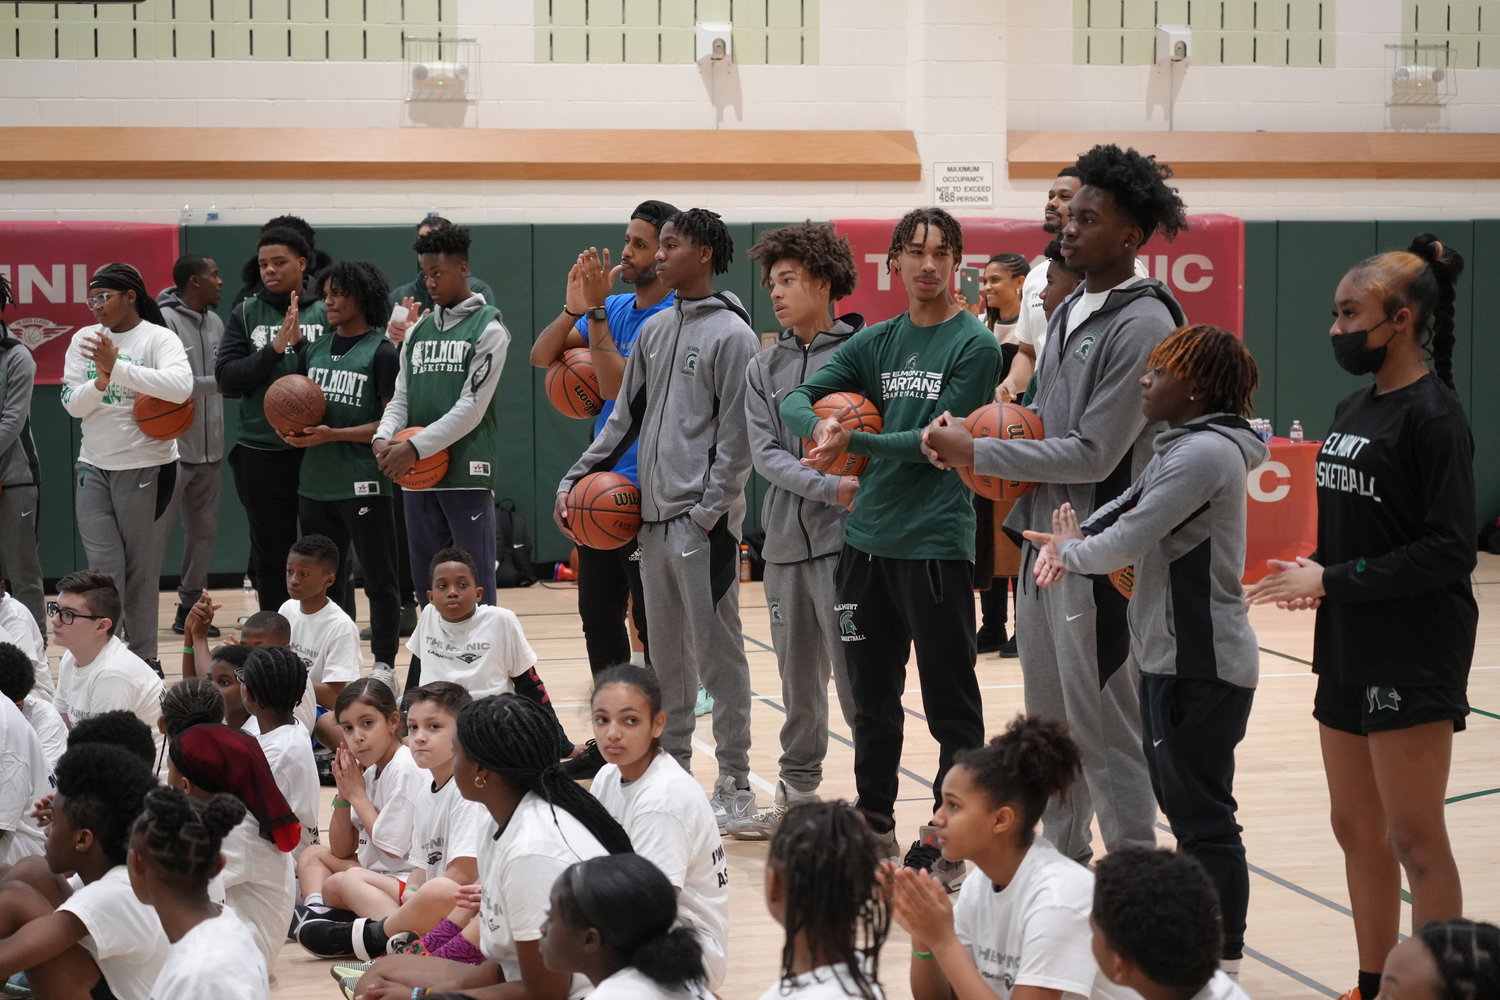 Roughly 75 students ages 7 to 14 participated in the Klinic Kids program hosted on Feb. 25 at Elmont Memorial High School where they tested their skills through various drills lead by professional trainers and coaches.